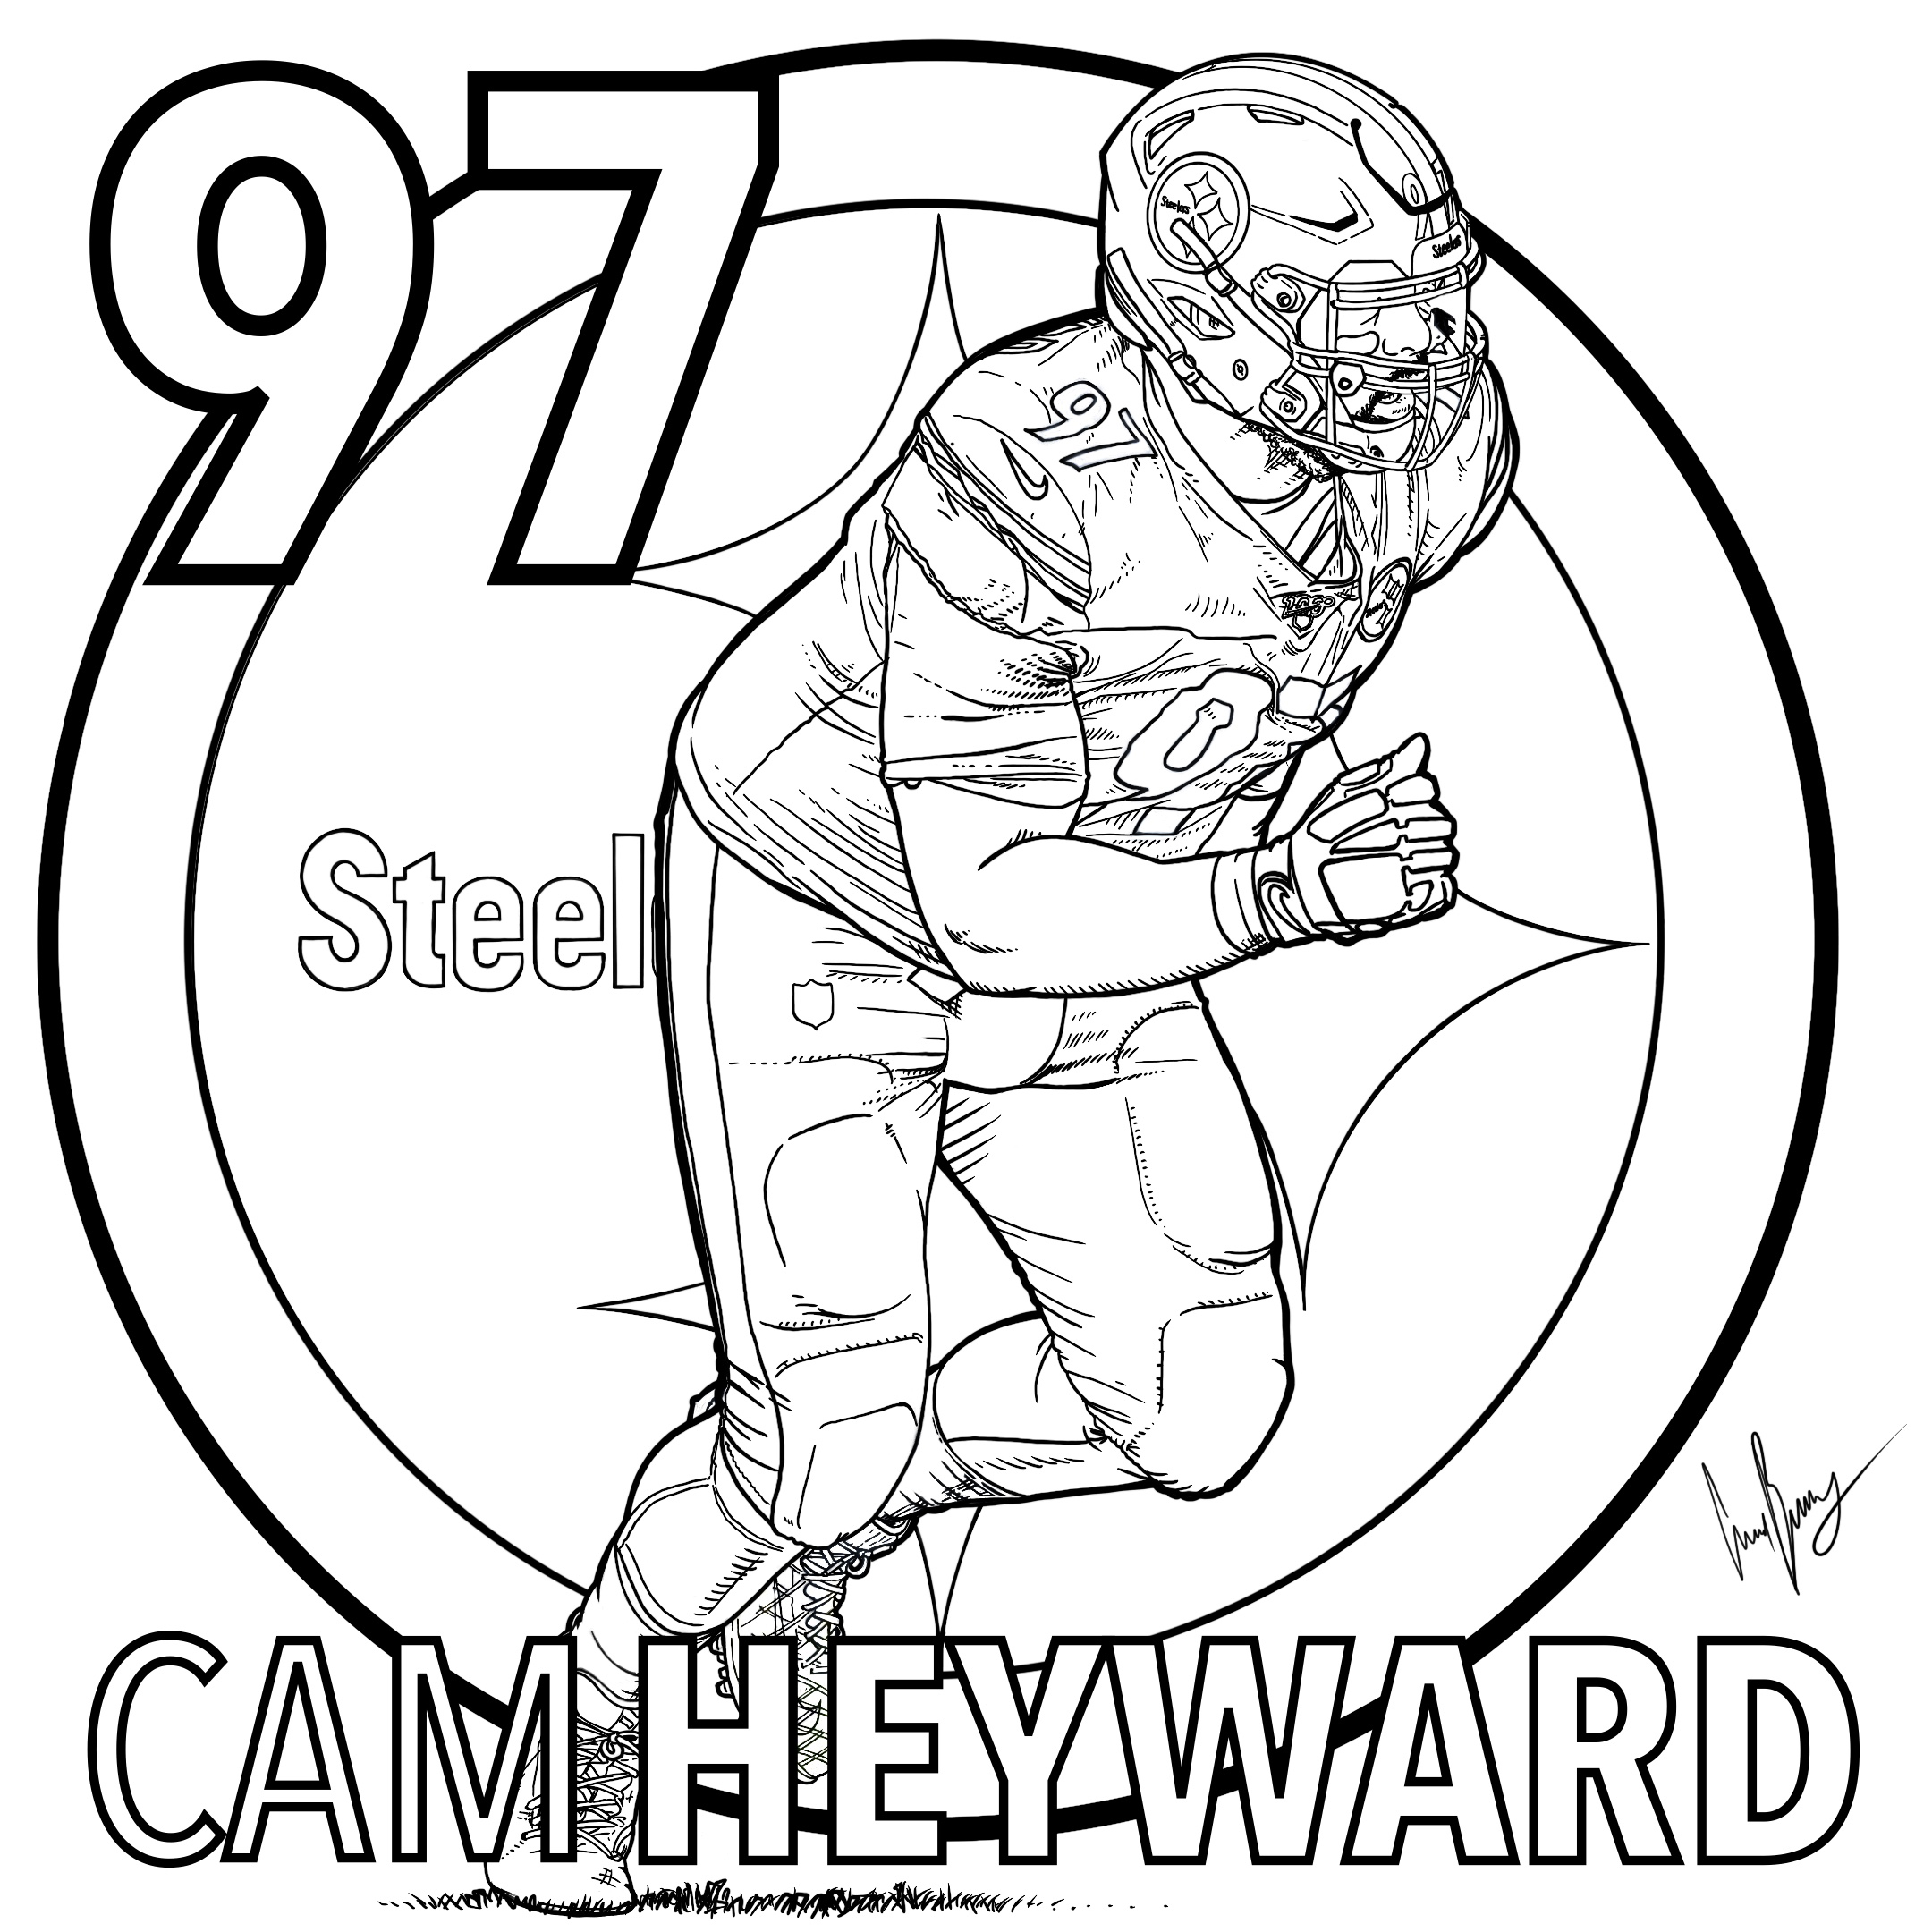 Pittsburgh Steelers Coloring Pages | Pittsburgh Steelers - Steelers.com